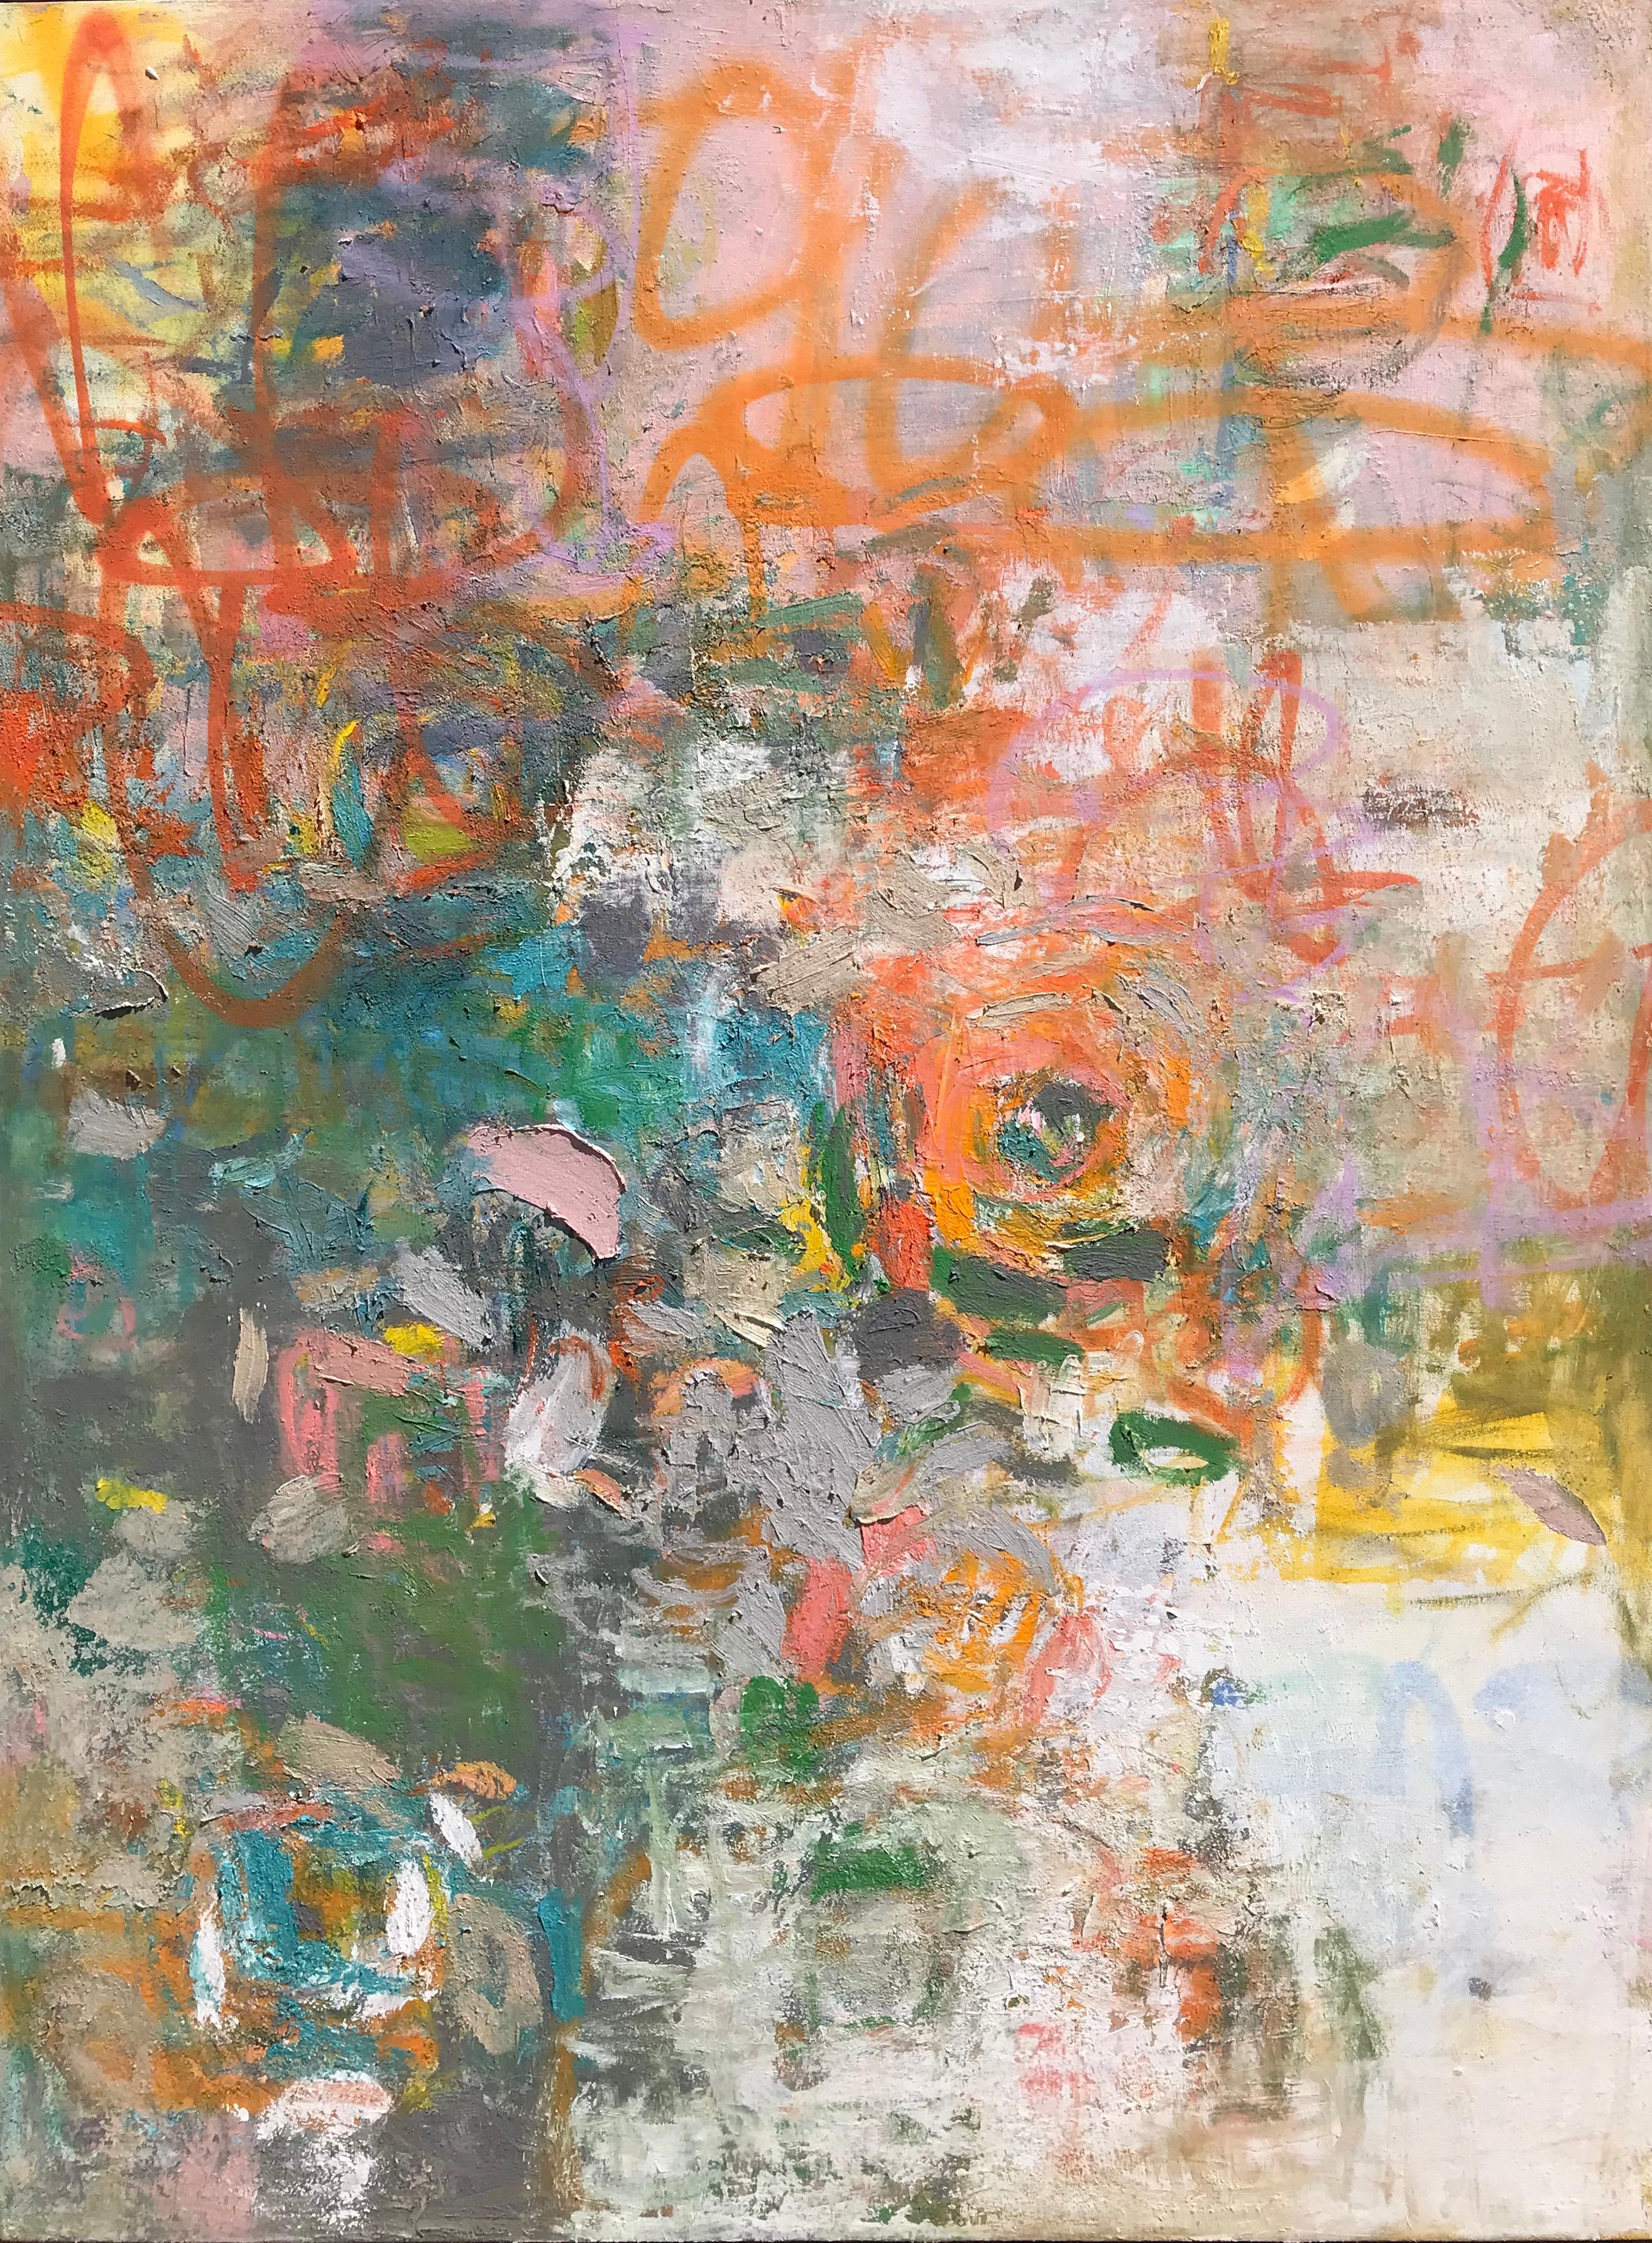 Amy Donaldson
"Deeply Loved", 2019
60 x 50"
 Oil on Canvas
 $6600
 Amy Donaldson has exhibited internationally from London to New York, Chicago and California. A 2016 solo show in Paris, Brussels Art Fair, Art Basel Miami, Atlanta’s National Juried